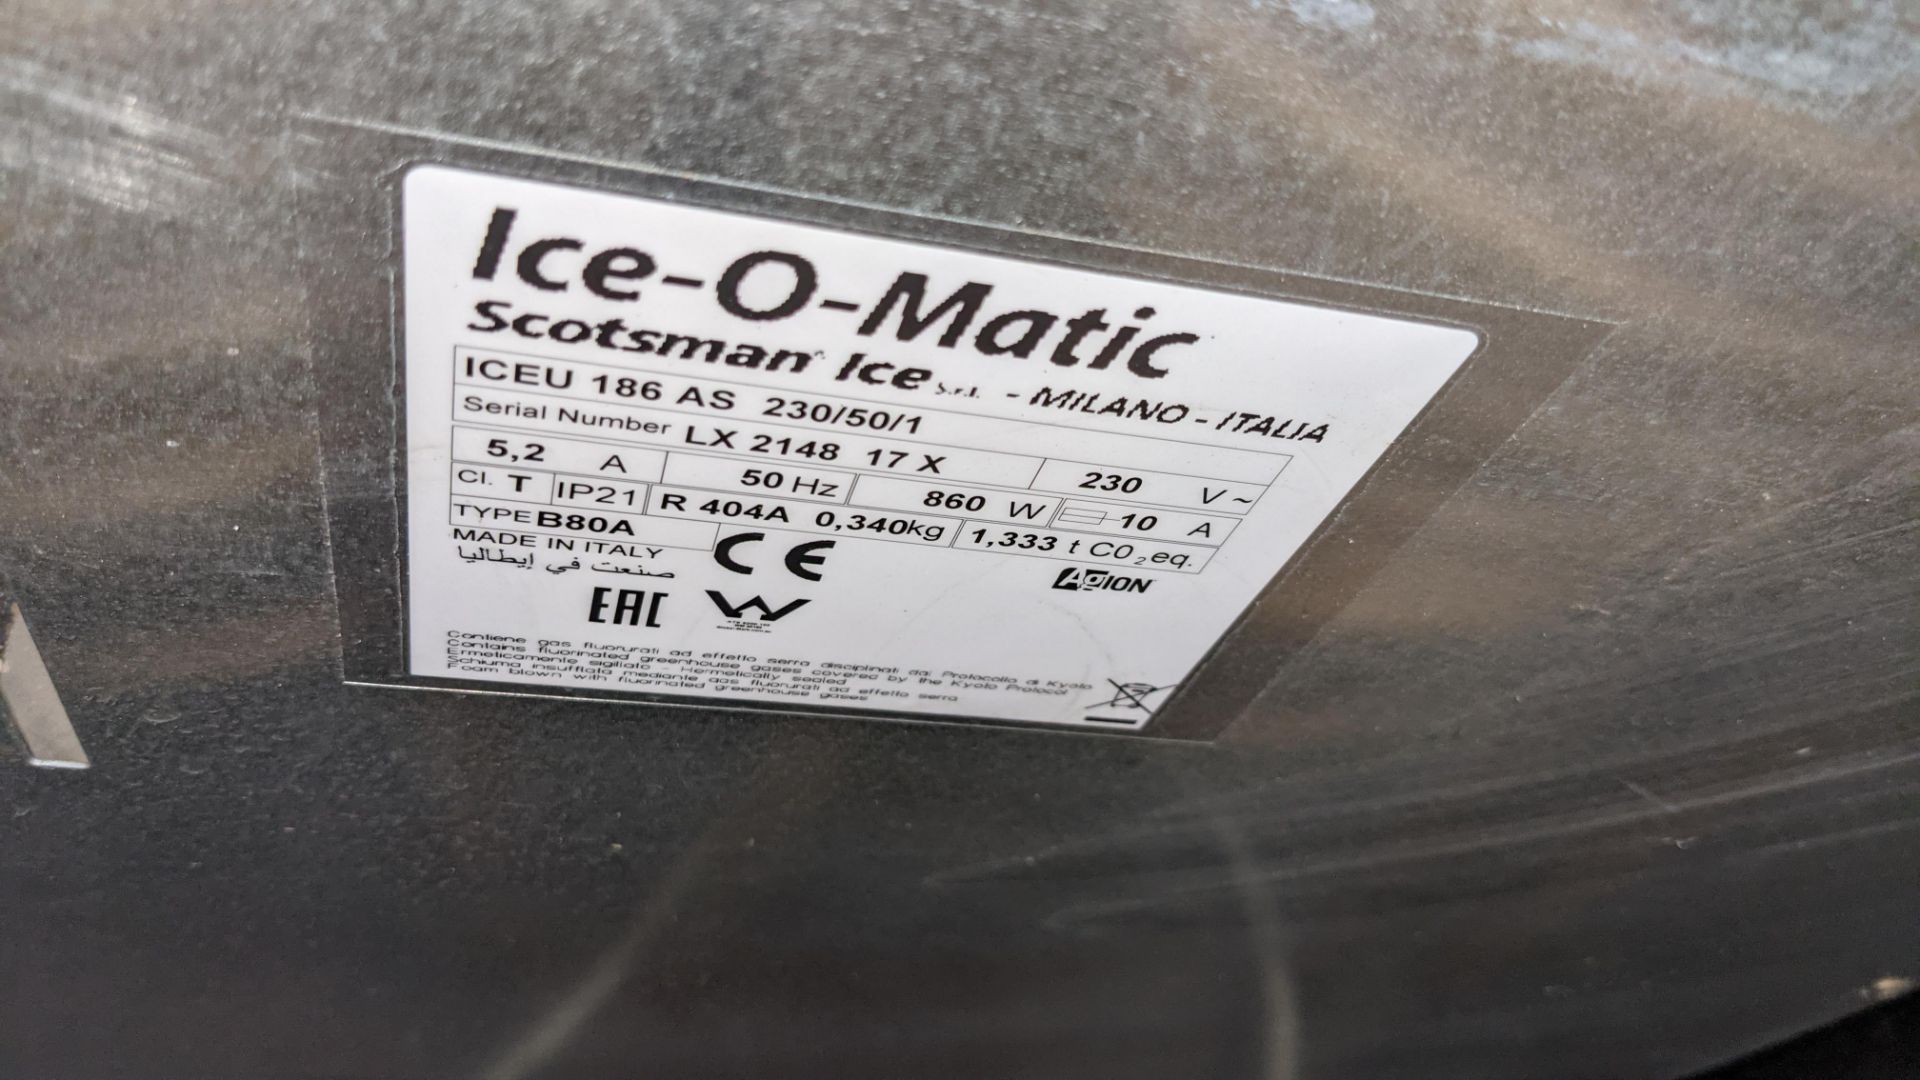 Ice-o-Matic commercial ice machine - Image 6 of 6